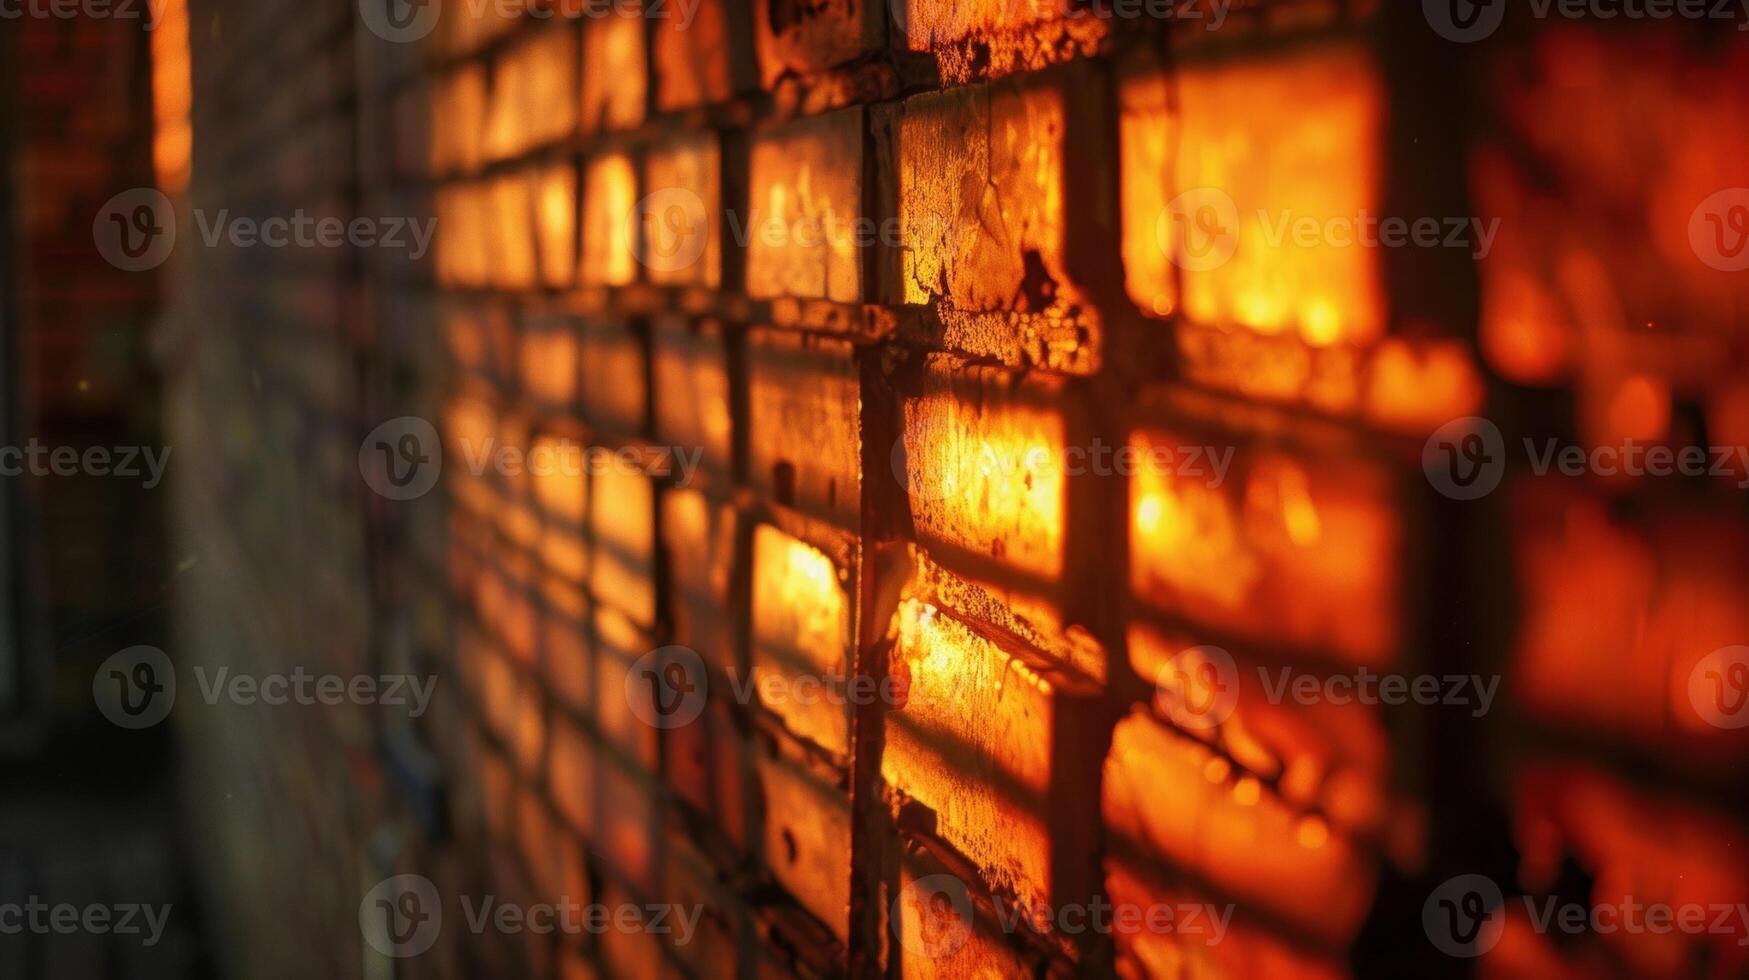 The fire dances and plays against the steel grate casting interesting shadows on the rough exposed brick of the loft. 2d flat cartoon photo